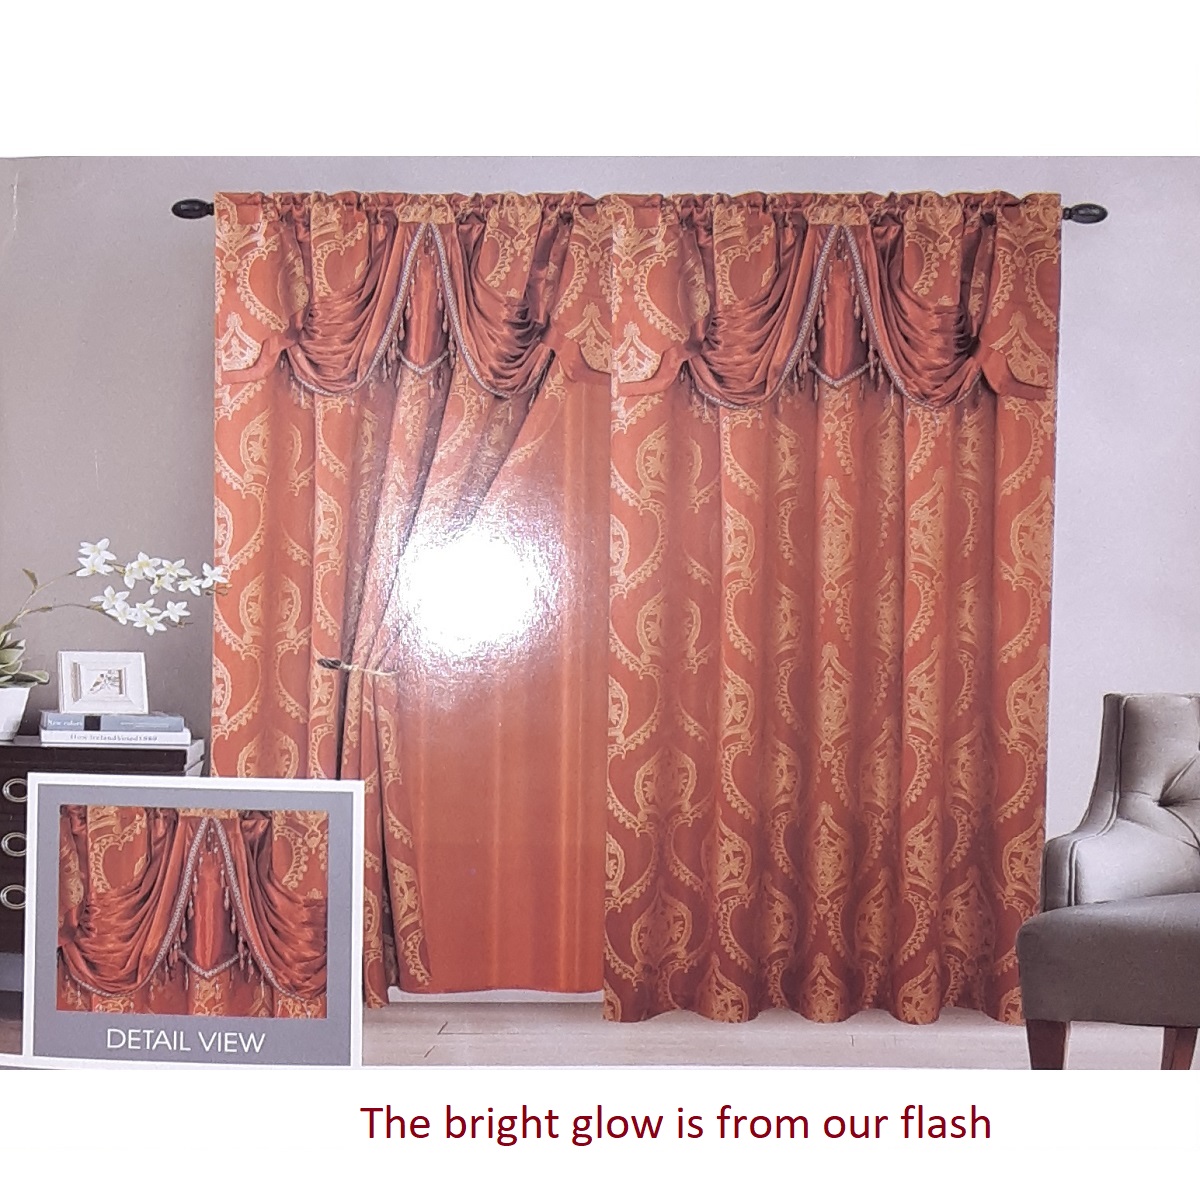 Windows Curtain Set Rust and Gold Drapes Bright curtains with liner and valance 